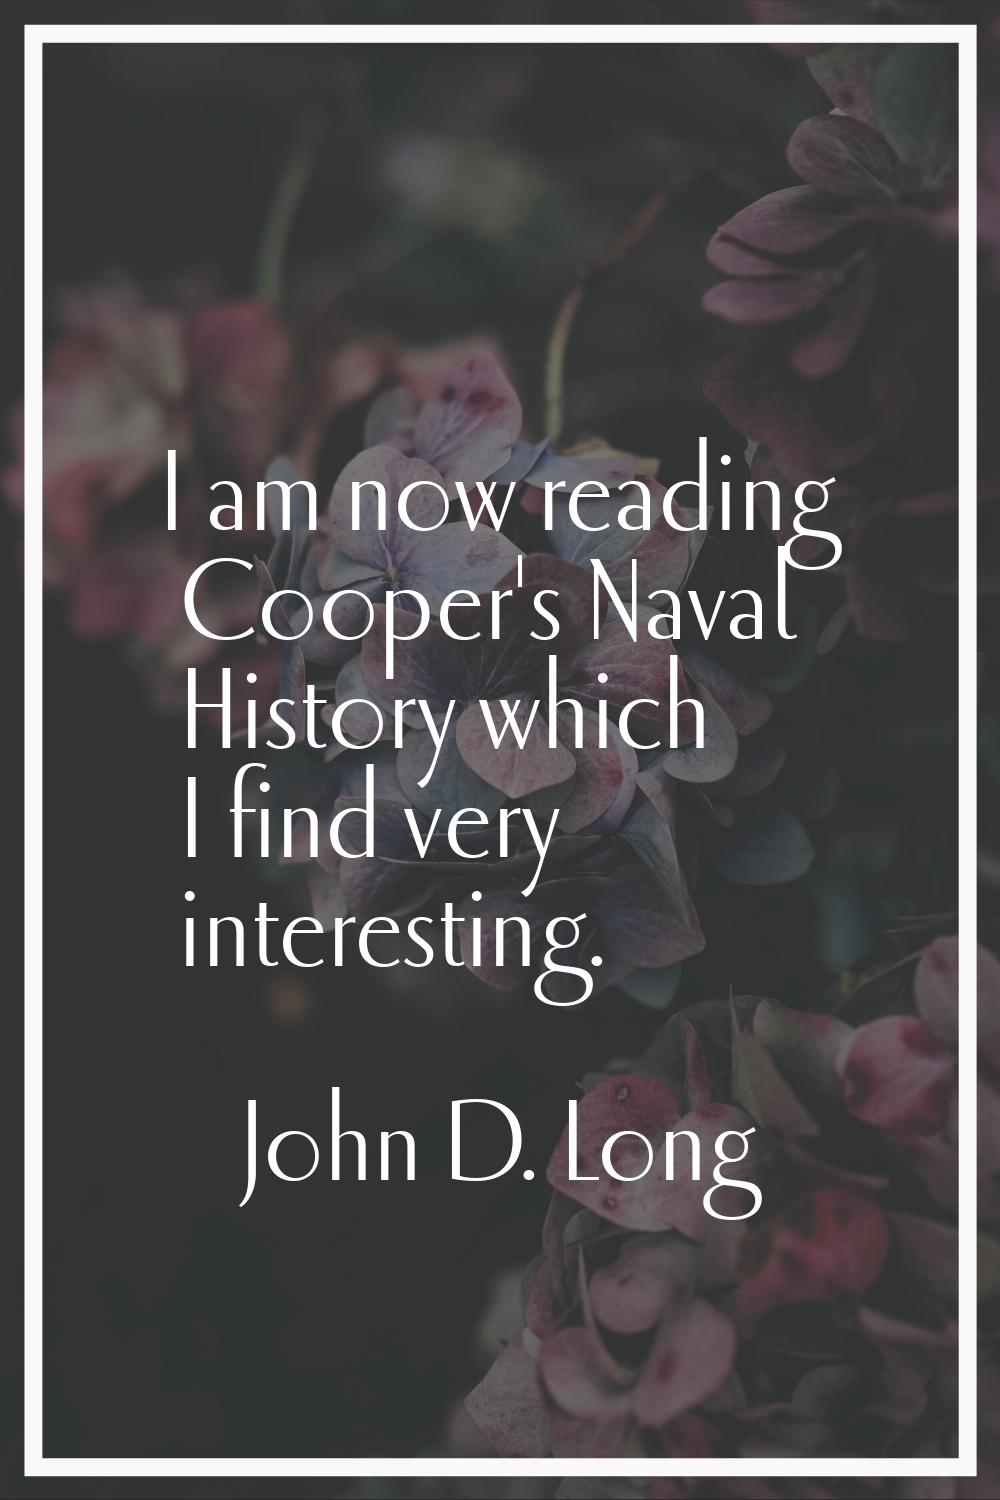 I am now reading Cooper's Naval History which I find very interesting.